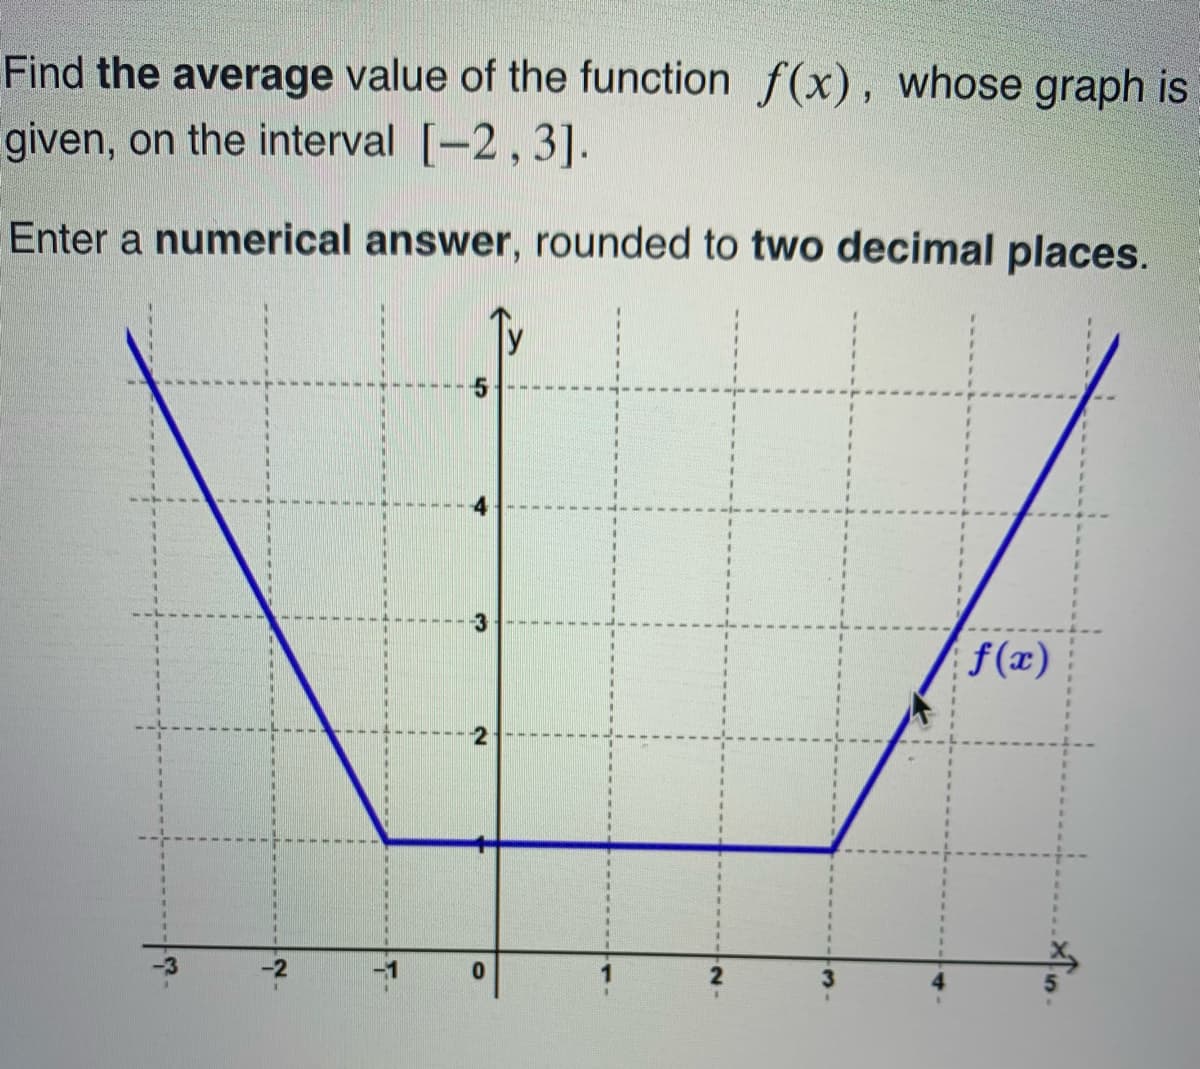 Find the average value of the function f(x), whose graph is
given, on the interval [-2,3].
Enter a numerical answer, rounded to two decimal places.
f(x)
-1
0.
